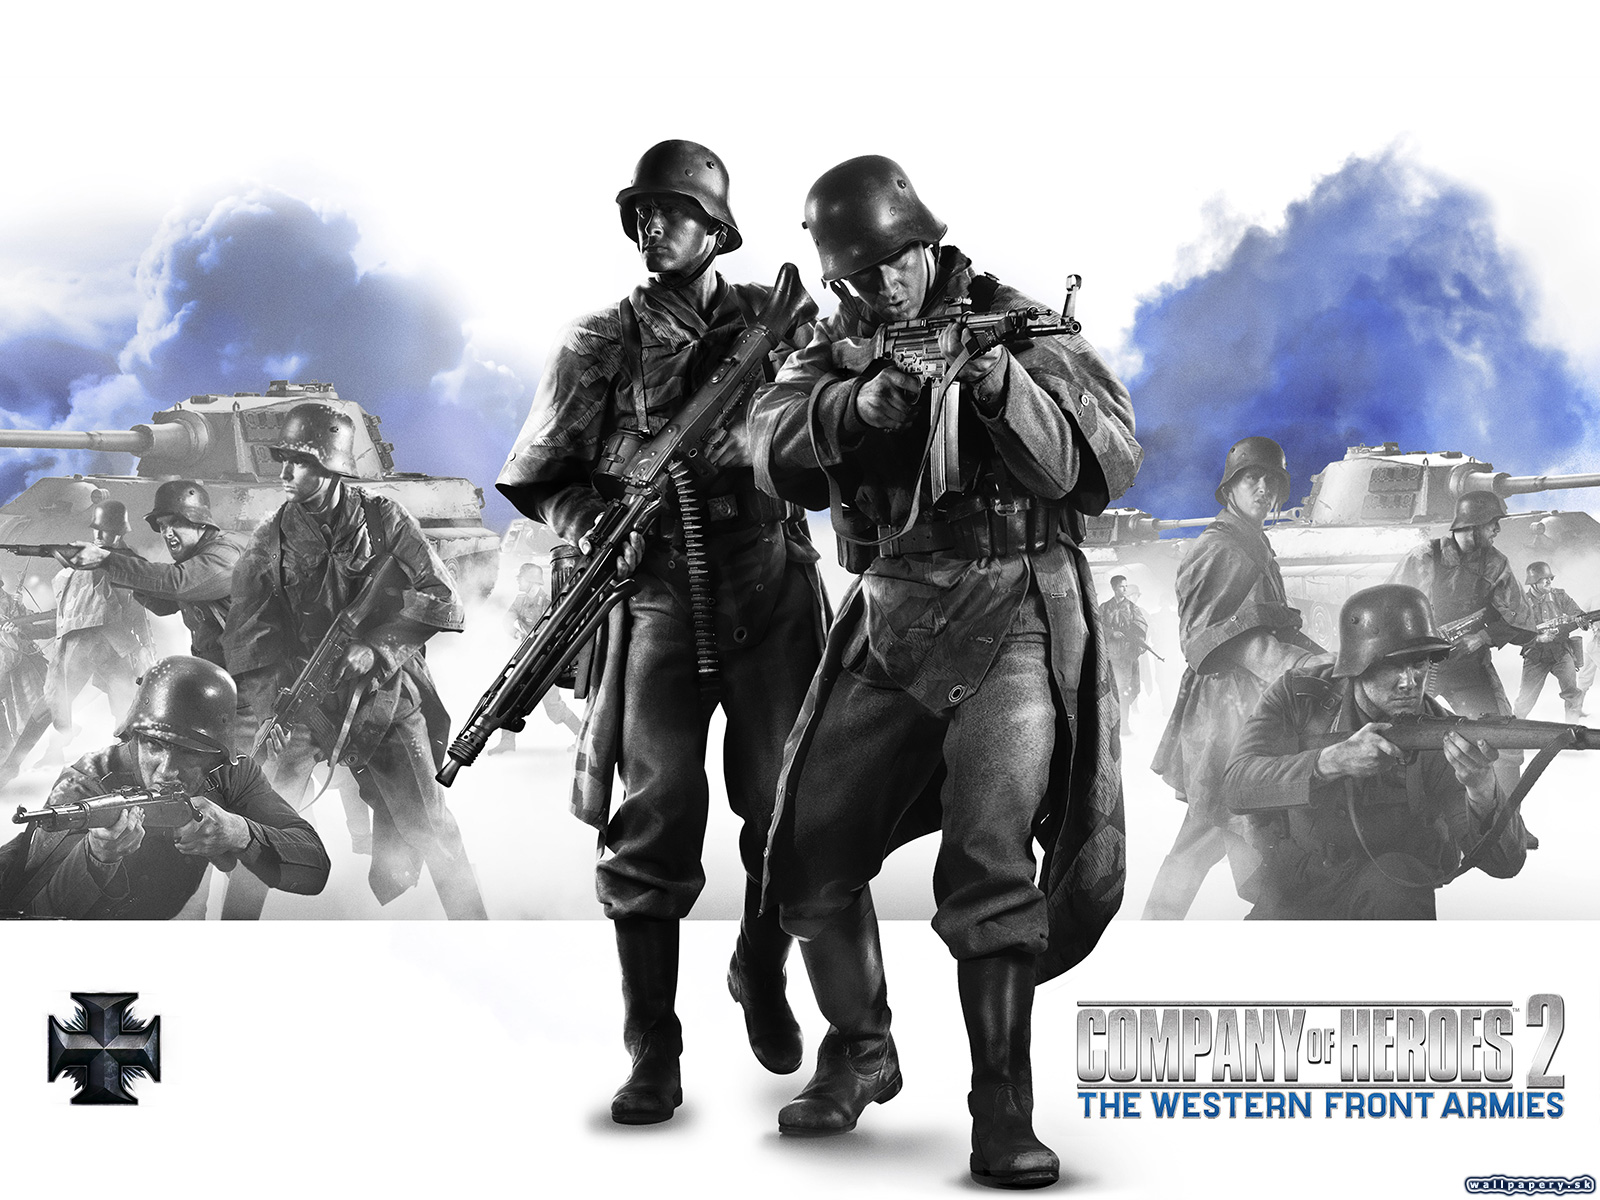 Company of Heroes 2: The Western Front Armies - wallpaper 2